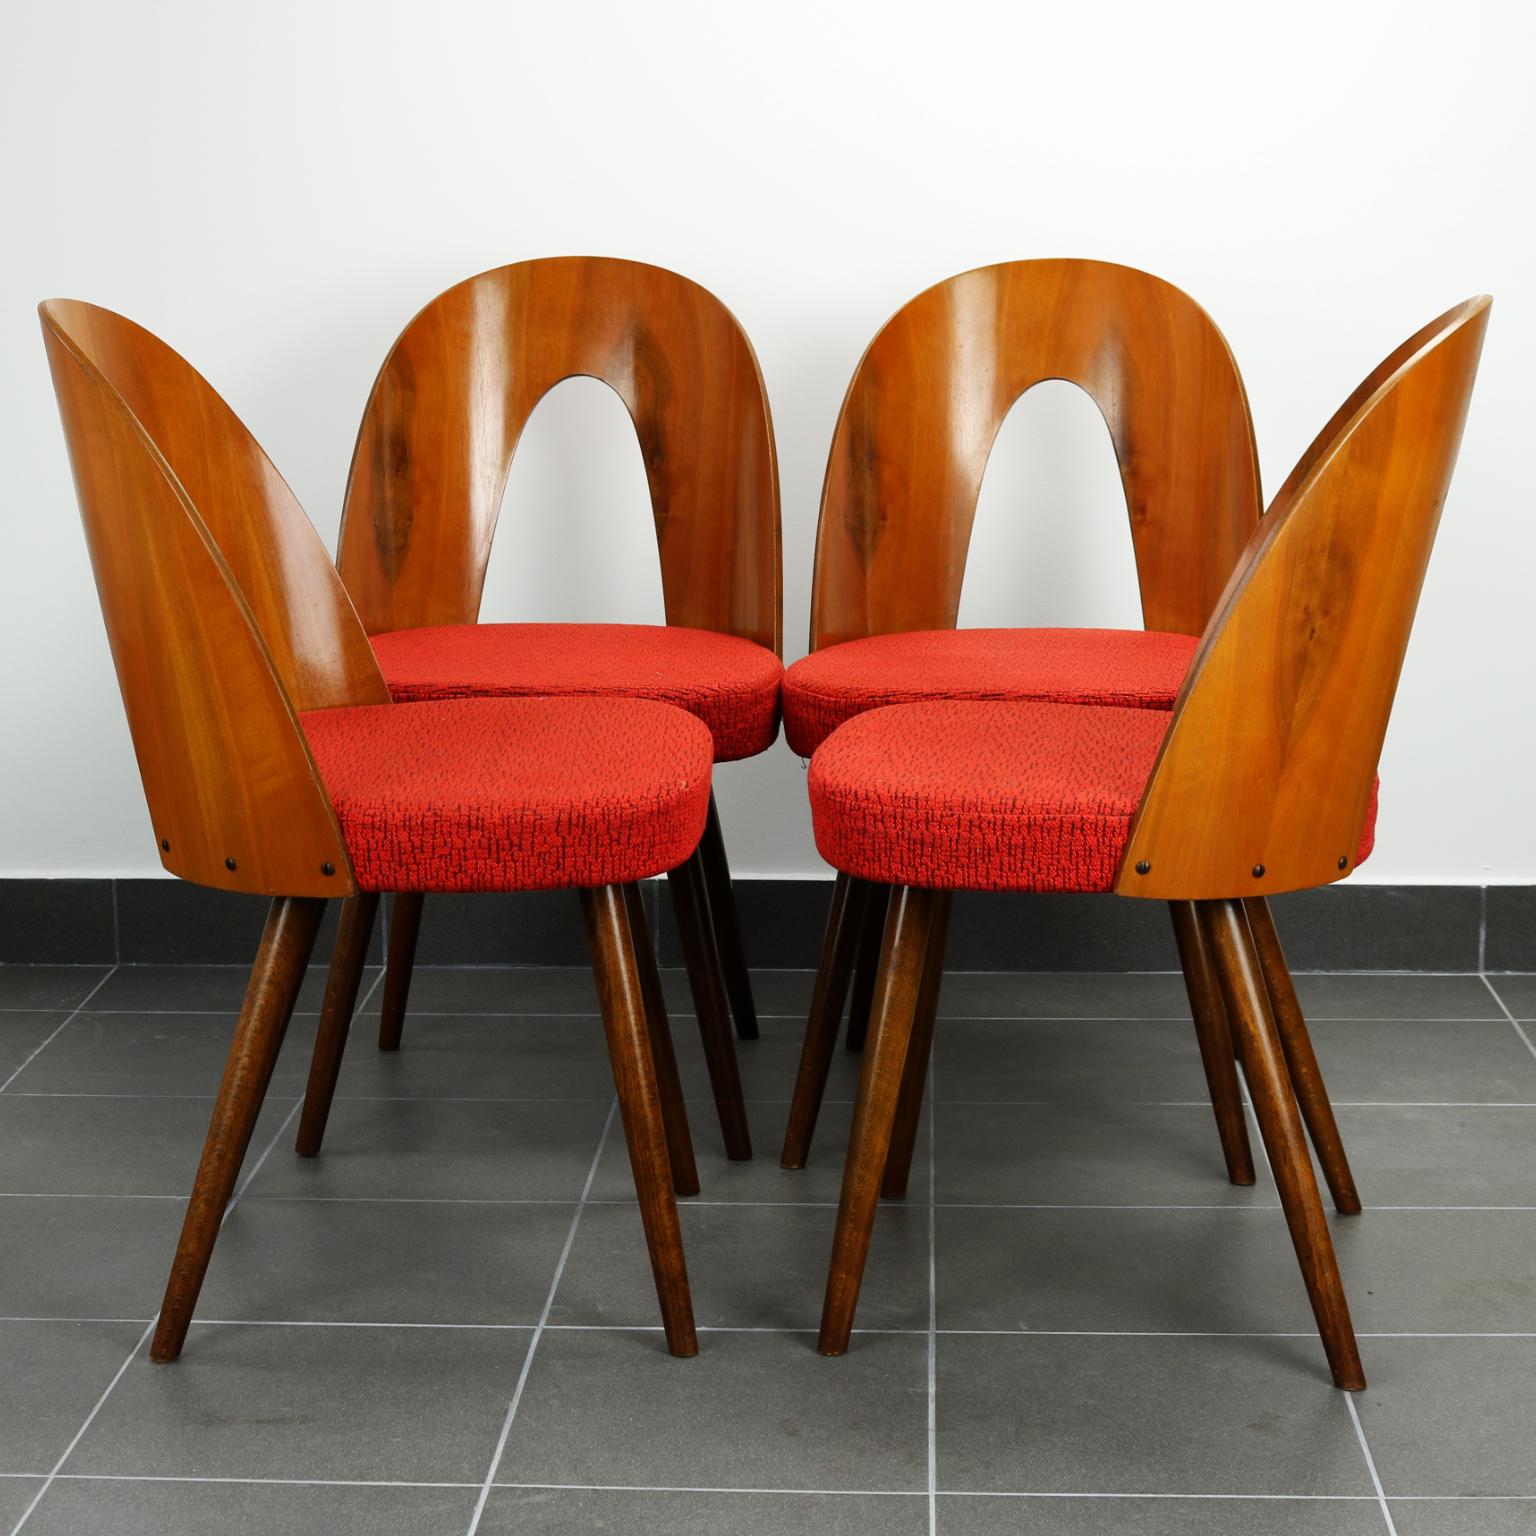 These chairs were designed by Antonin Suman, and were manufactured by the Tatra Nabytok Company, in the 1960s, in Czechoslovakia. Their red original fabric is still in perfect condition.